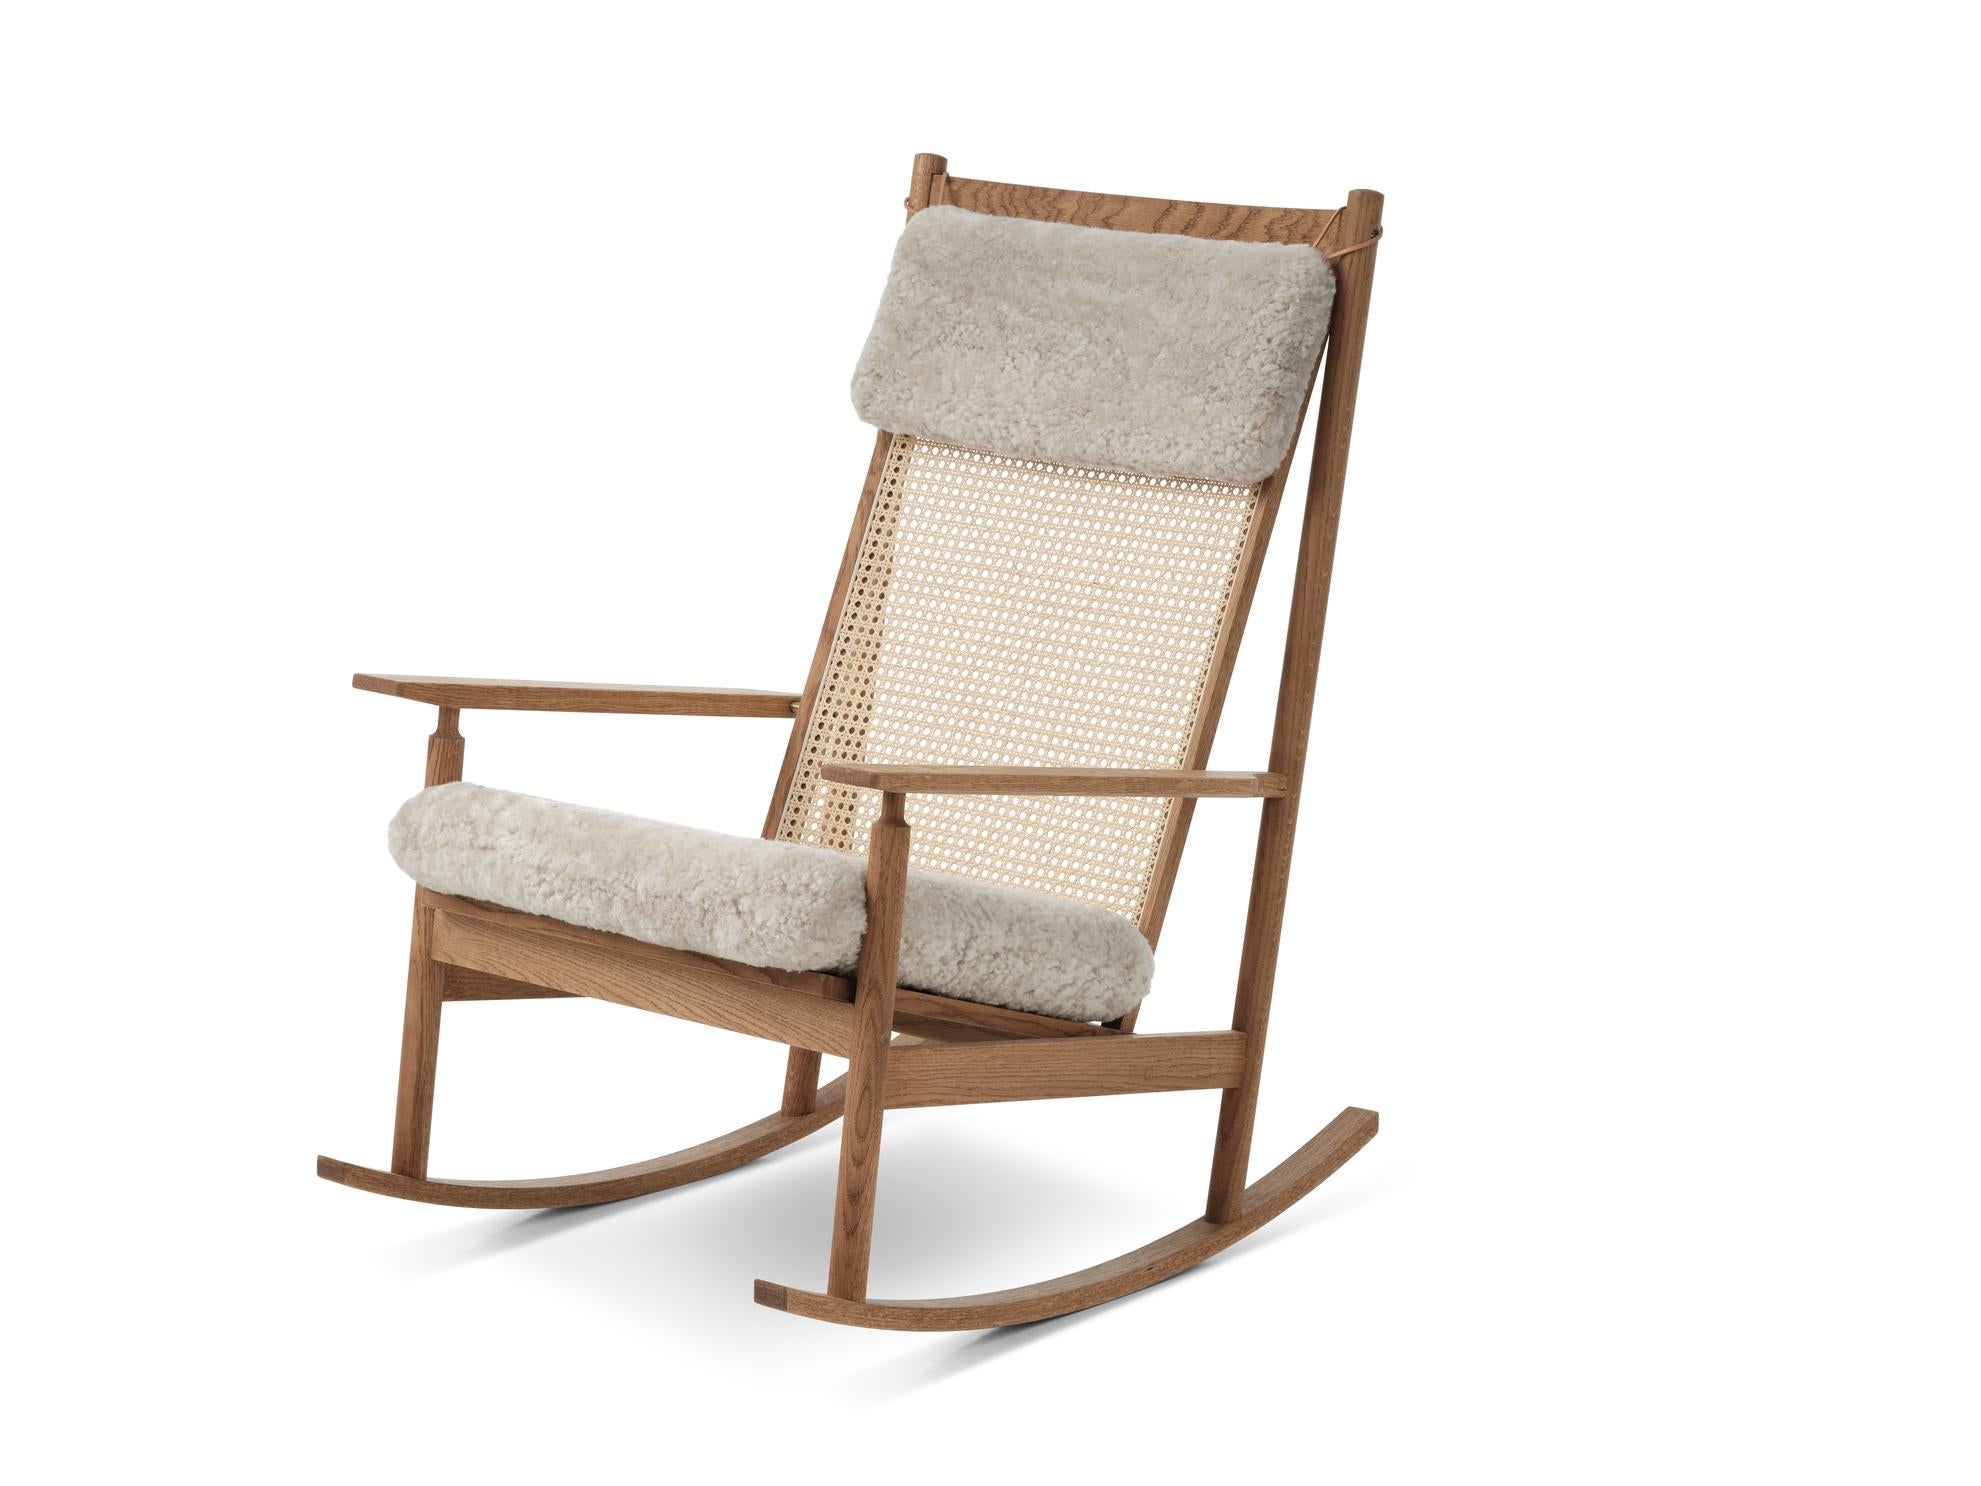 Swing rocking chair sheepskin moonlight by Warm Nordic
Dimensions: D91 x W68 x H 103 cm
Material: Wood, Foam, Rubber springs, French cane, Textile or leather upholstery, Teak, Sheepskin upholstery
Weight: 16.5 kg
Also available in different